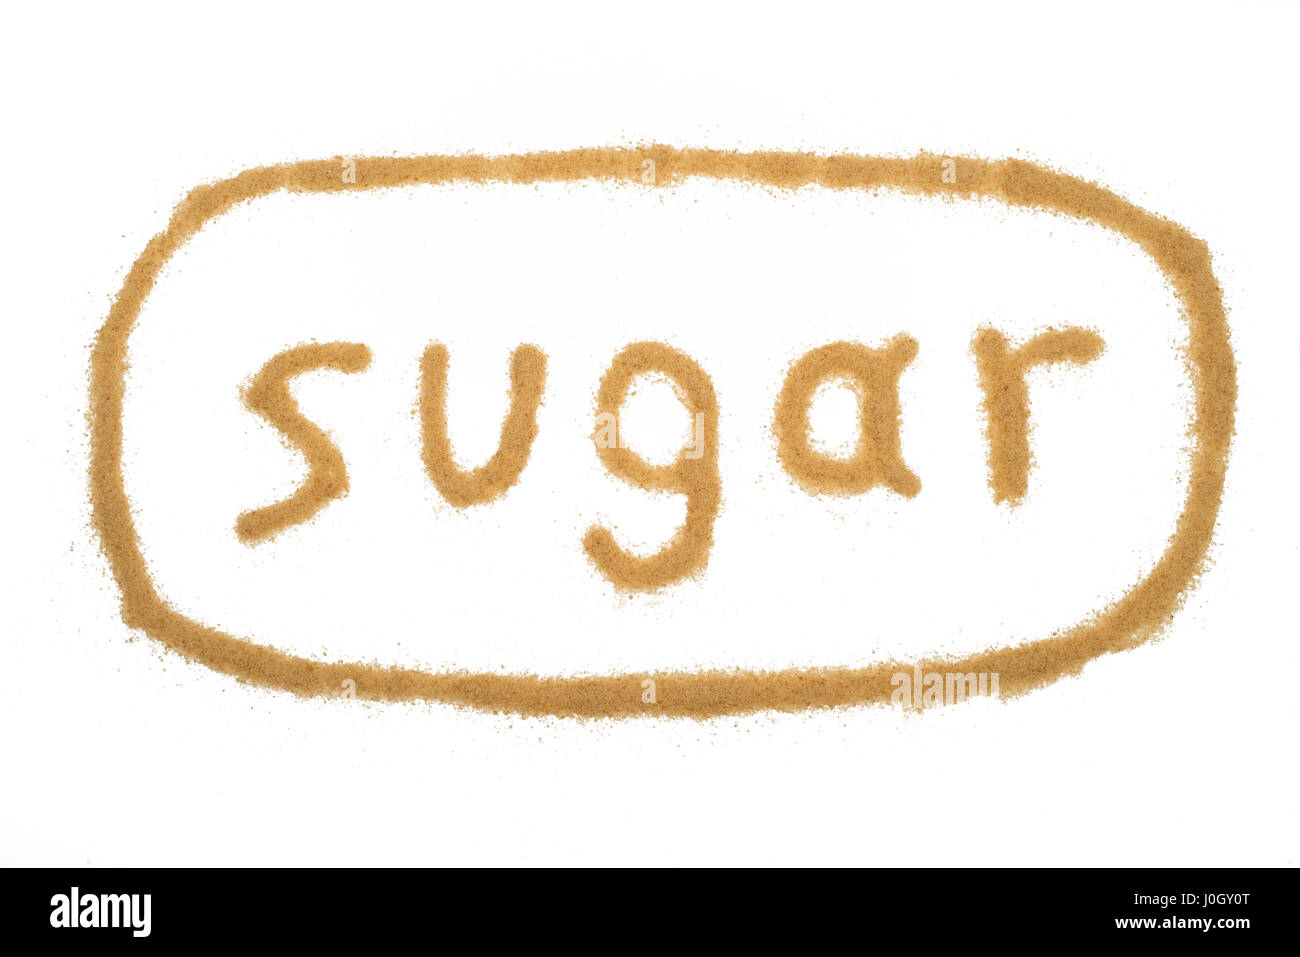 word sugar written with brown granulated sugar isolated Stock Photo